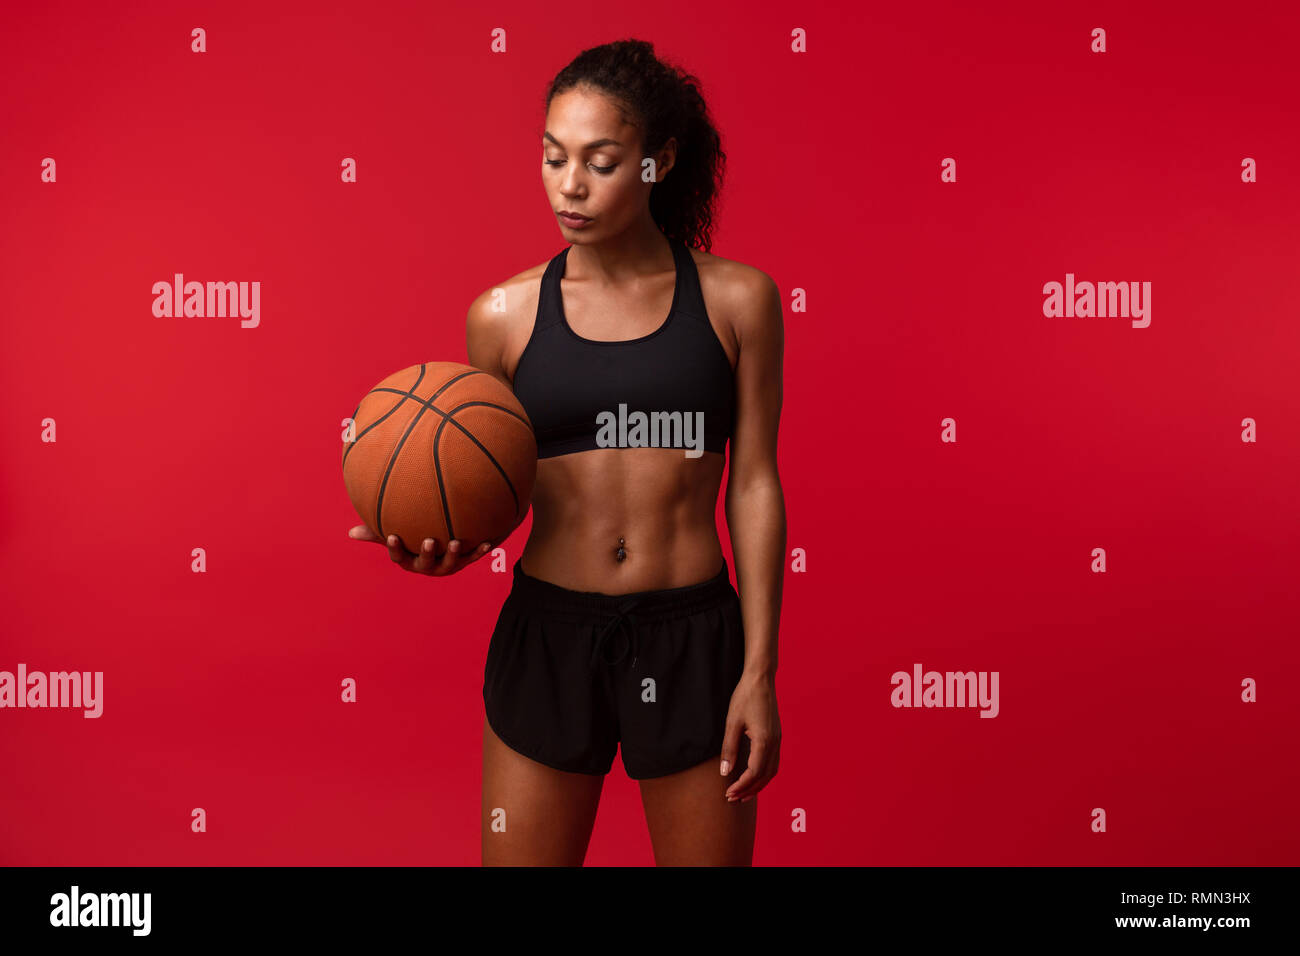 Image of a strong young african sports fitness woman basketball player posing isolated over red wall background holding ball. Stock Photo